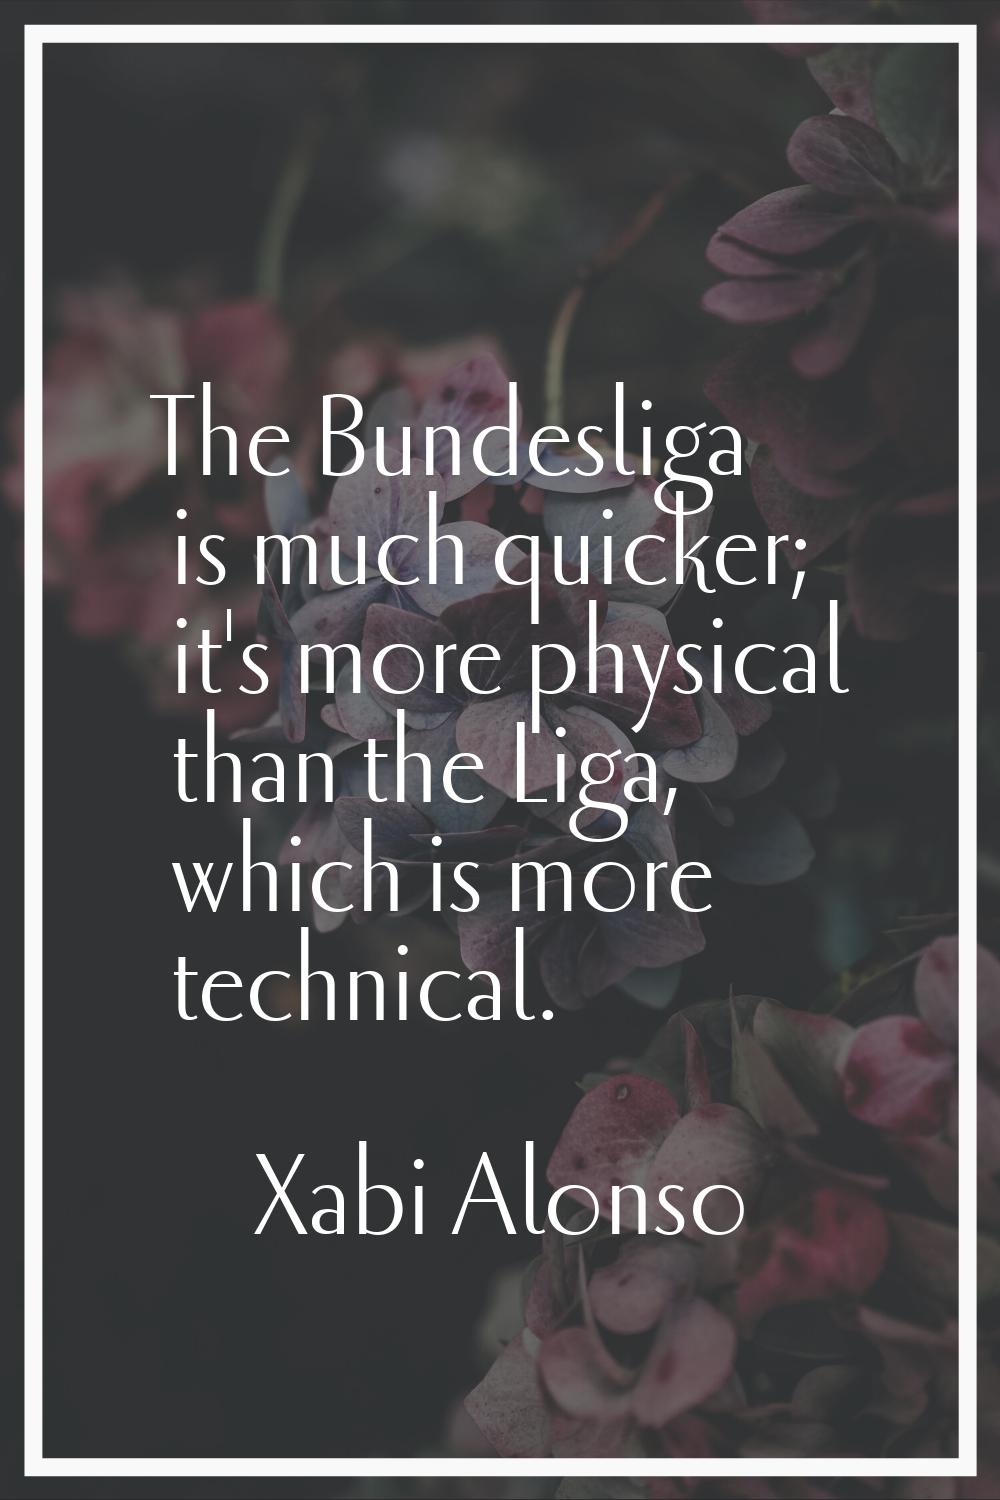 The Bundesliga is much quicker; it's more physical than the Liga, which is more technical.